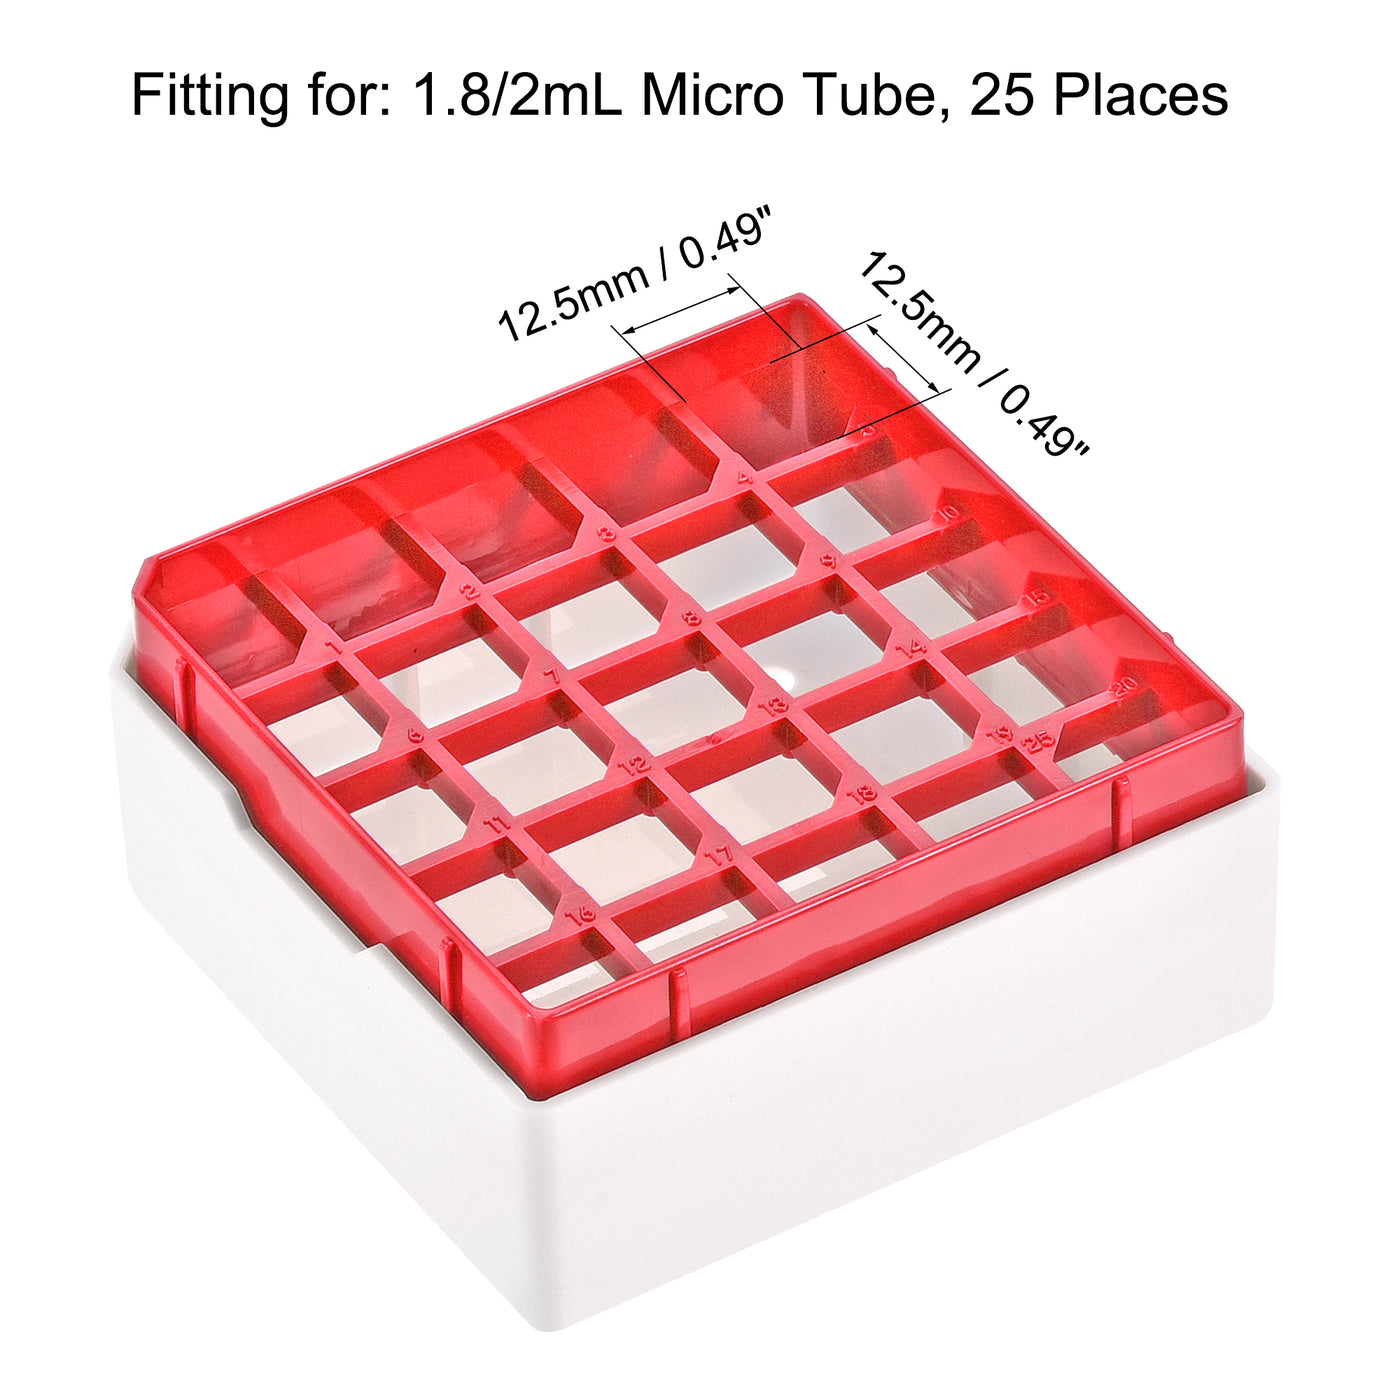 uxcell Uxcell Freezer Tube Box 25 Places Polypropylene Holder Rack for 1.8/2ml Microcentrifuge Tubes, Red